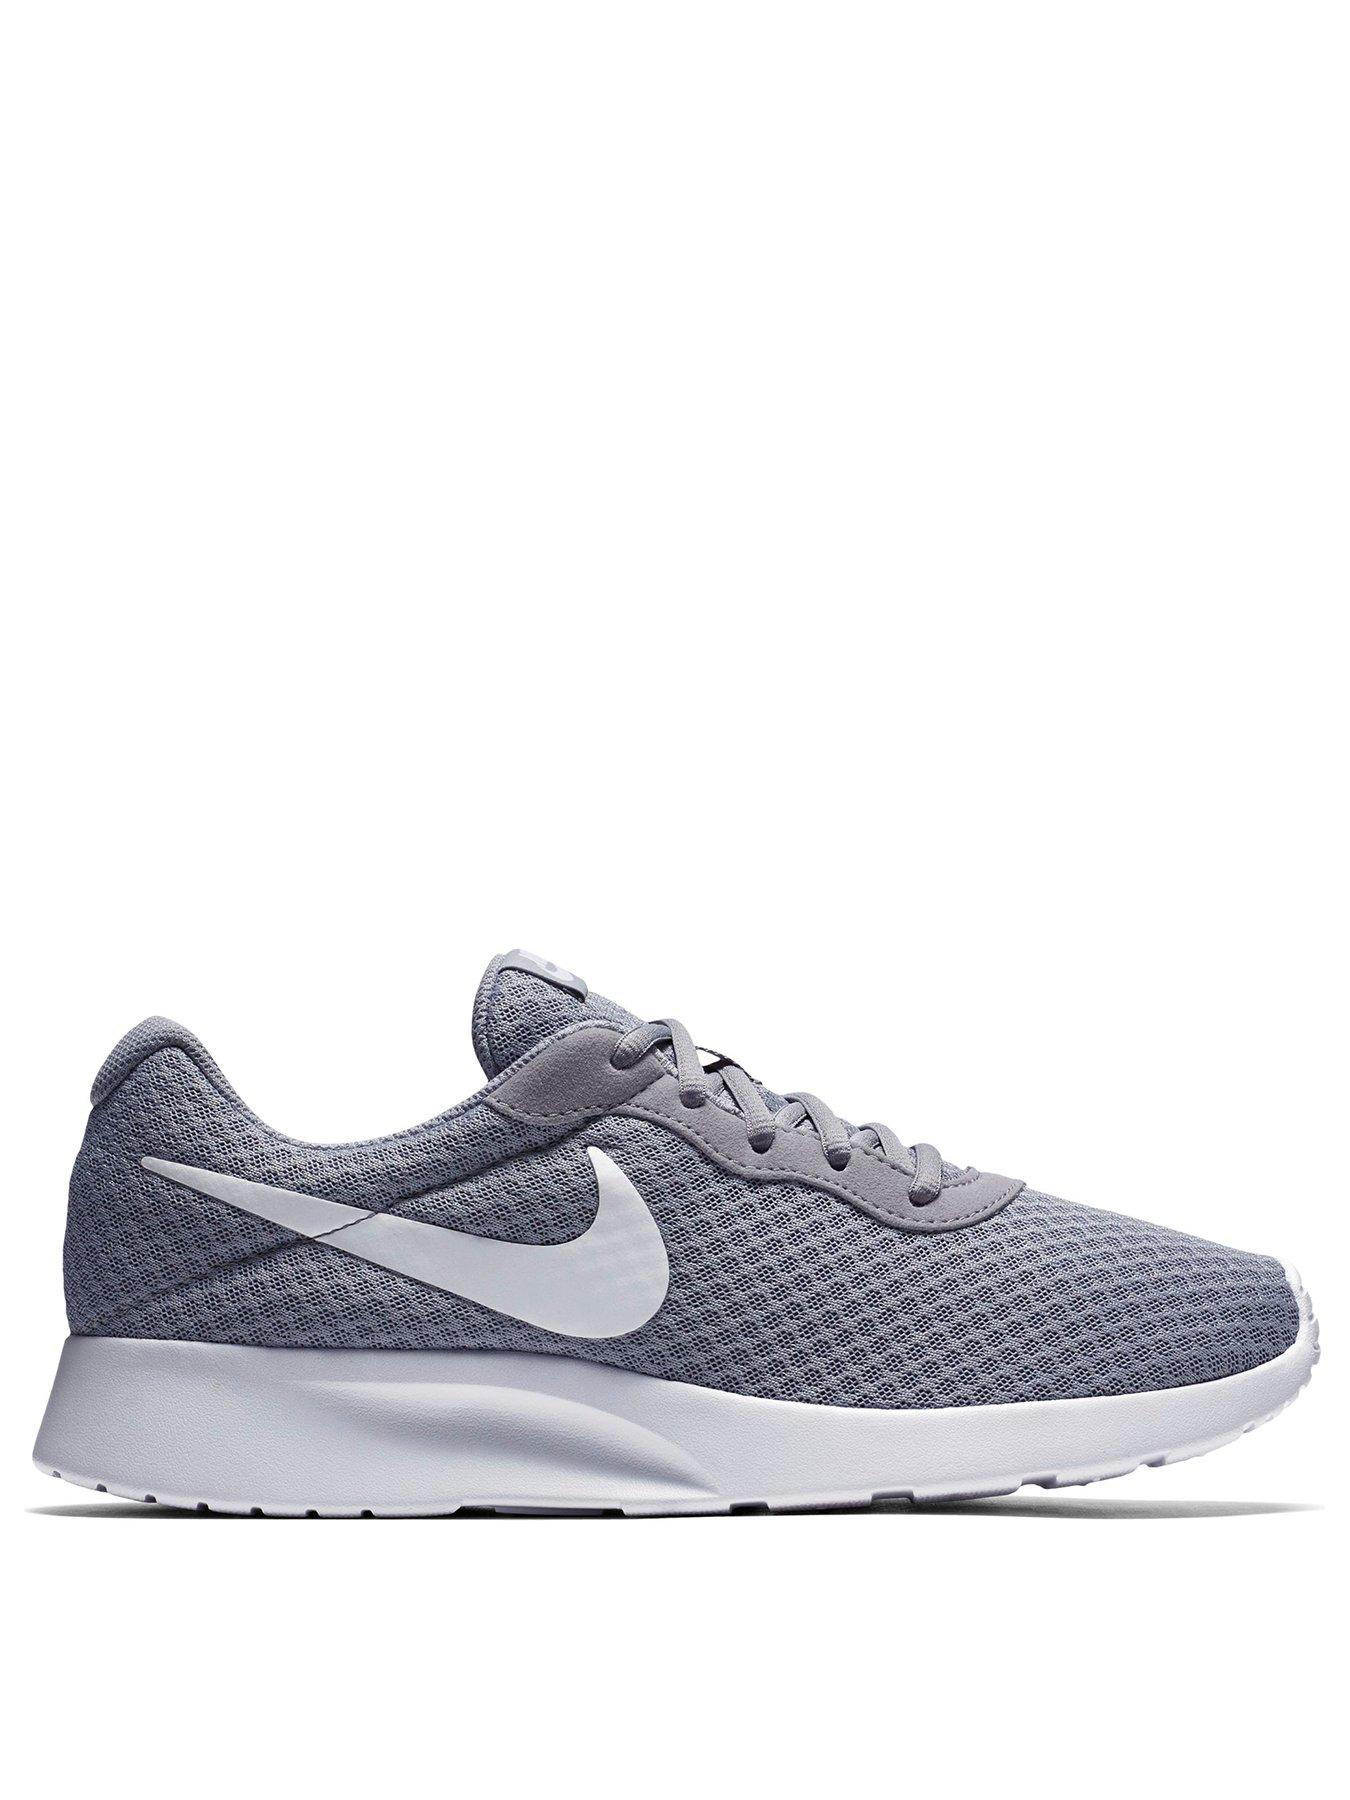 grey and white nike trainers